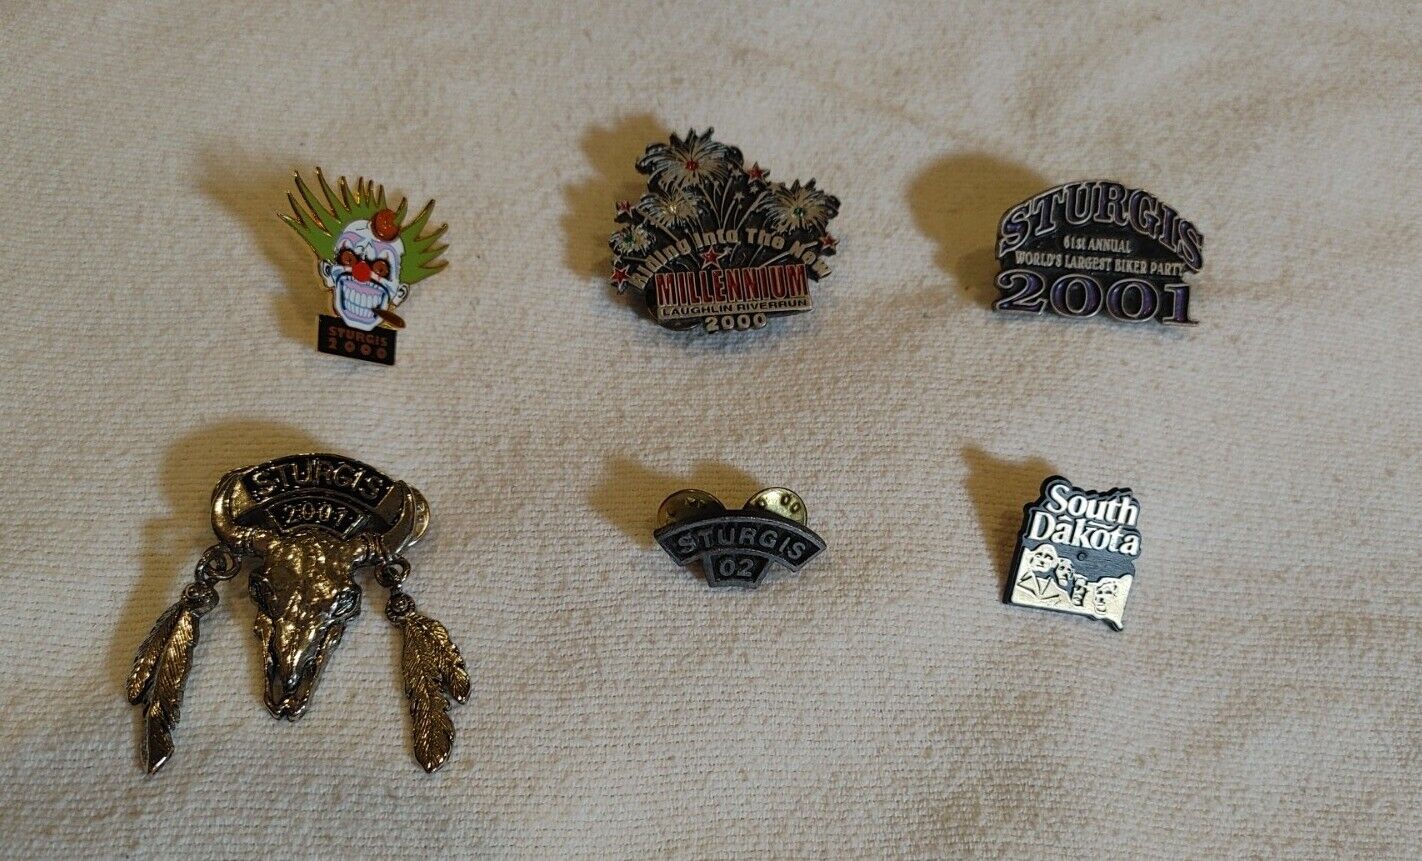 Sturgis Motorcycle Rally Pin Collection 2000-2002 6 Pins